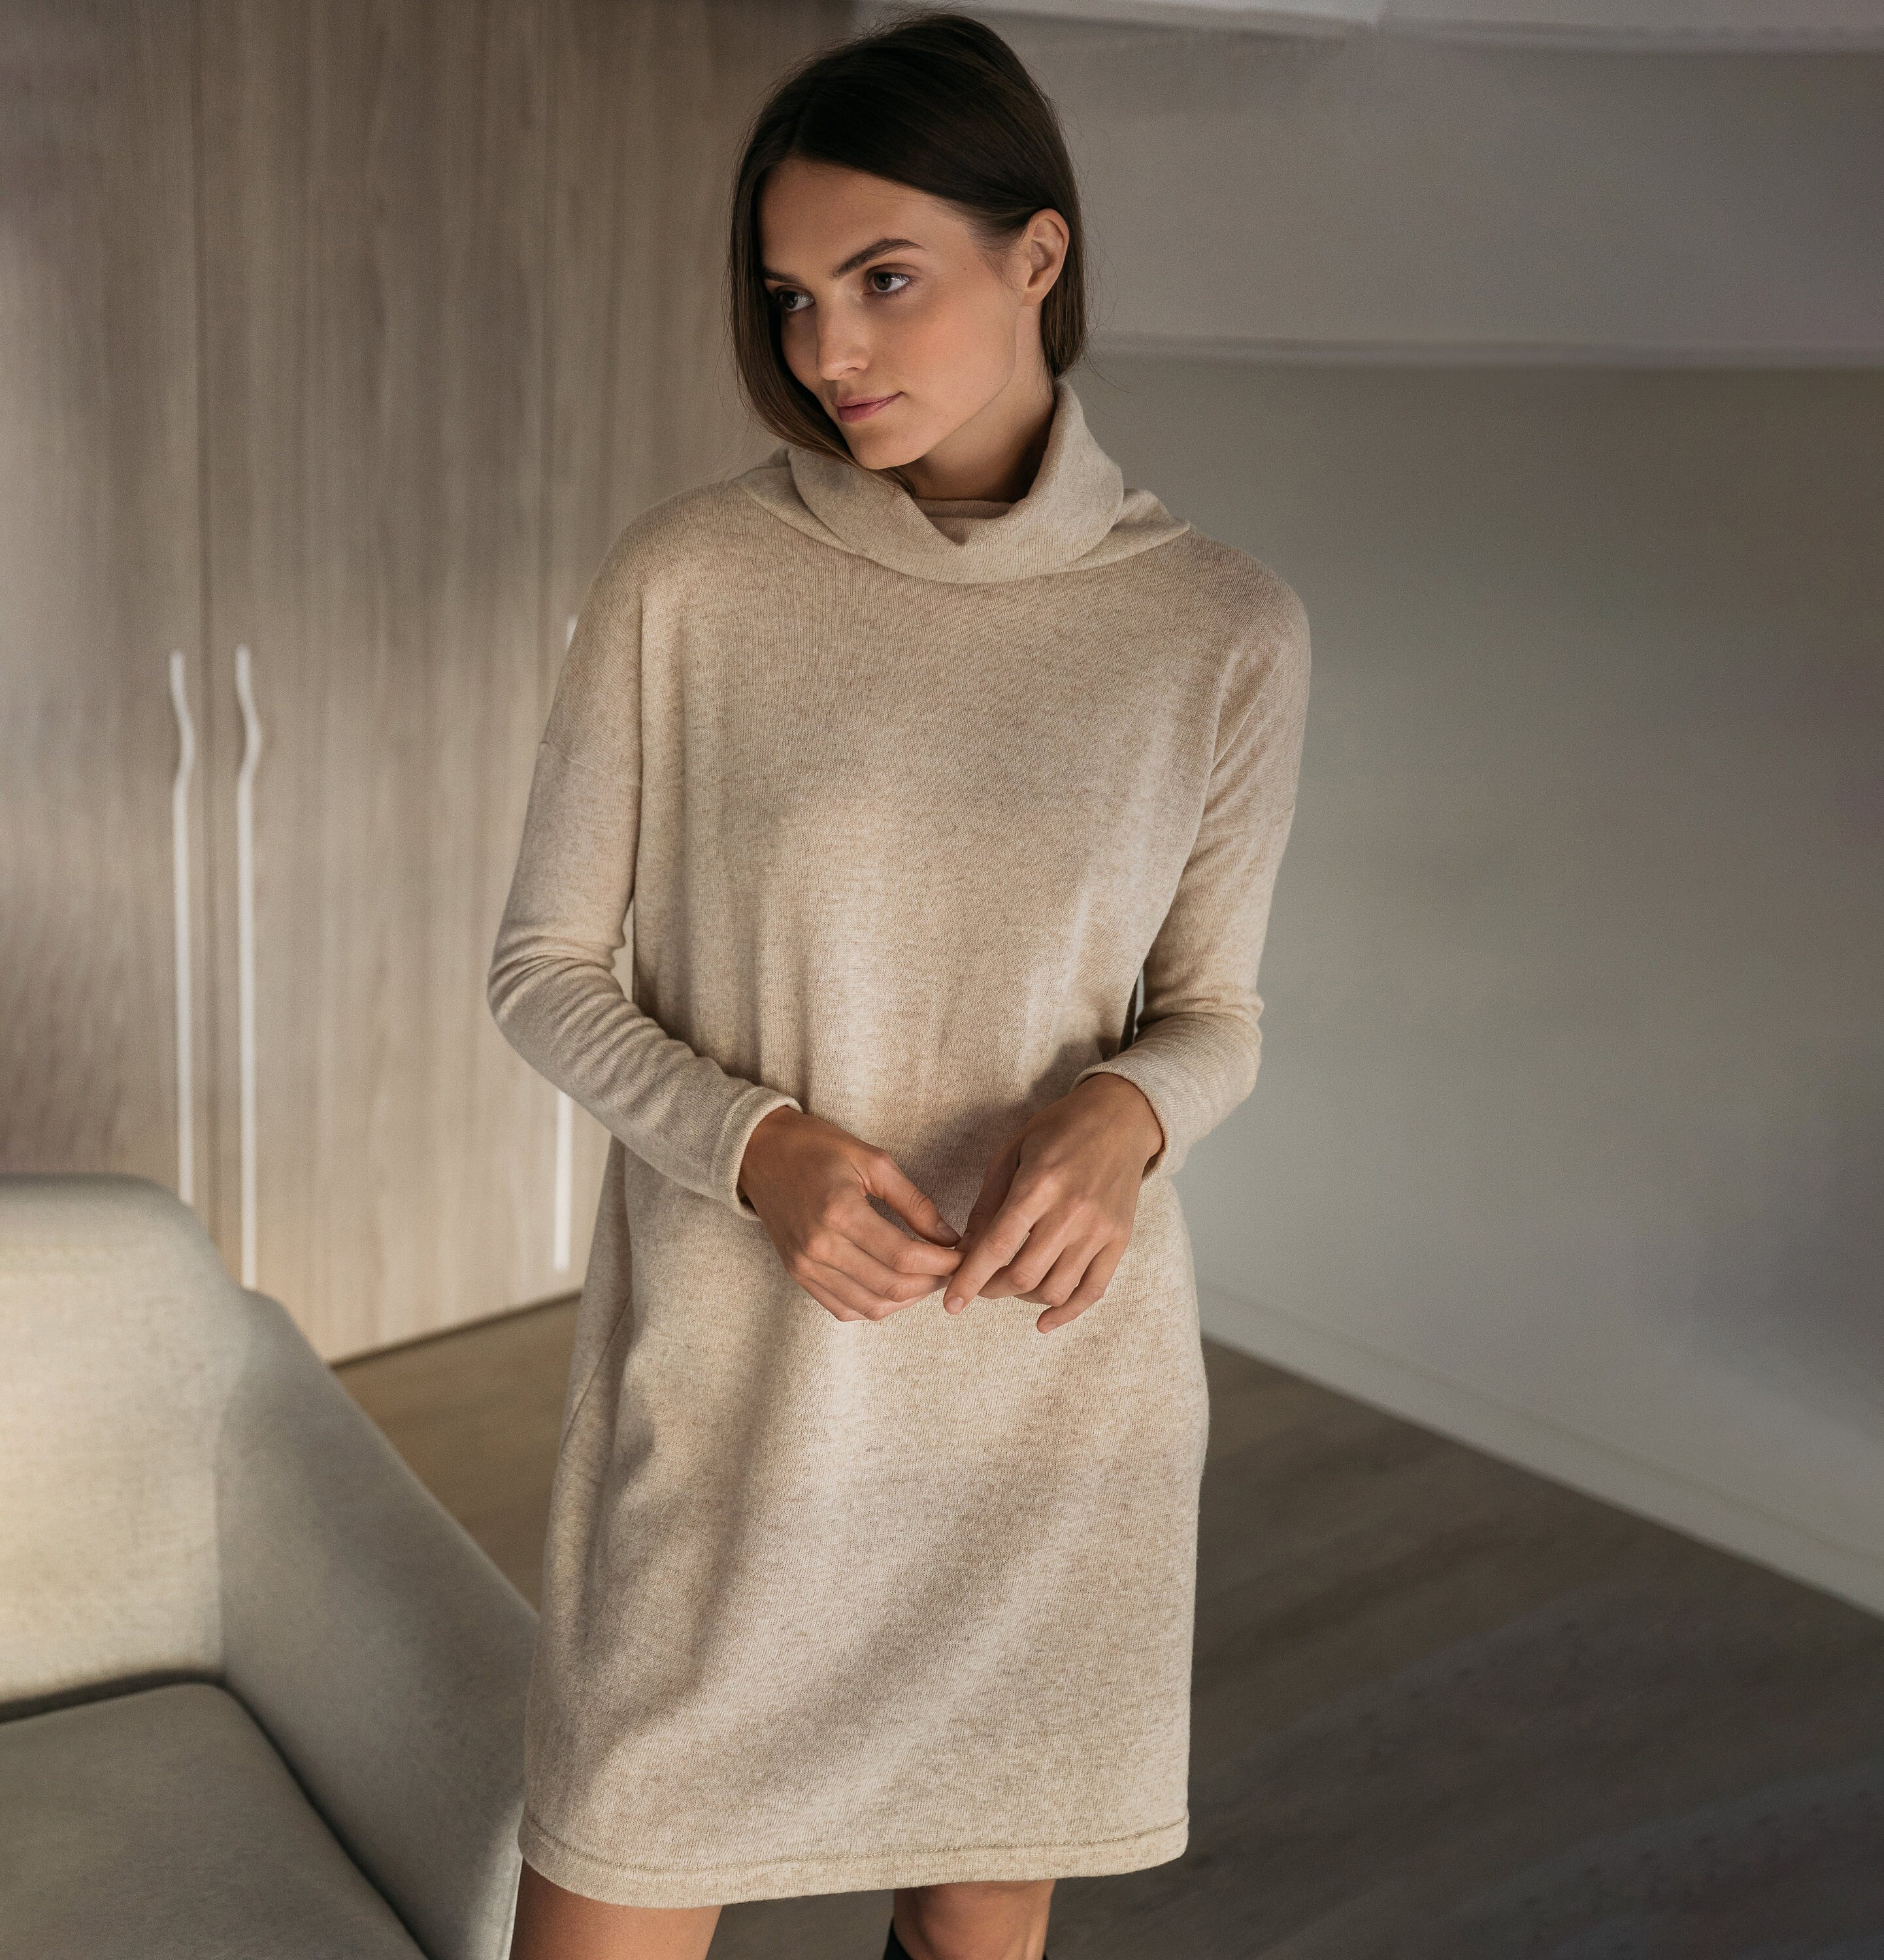 Buy Wool Sweater Dress Online In India -  India